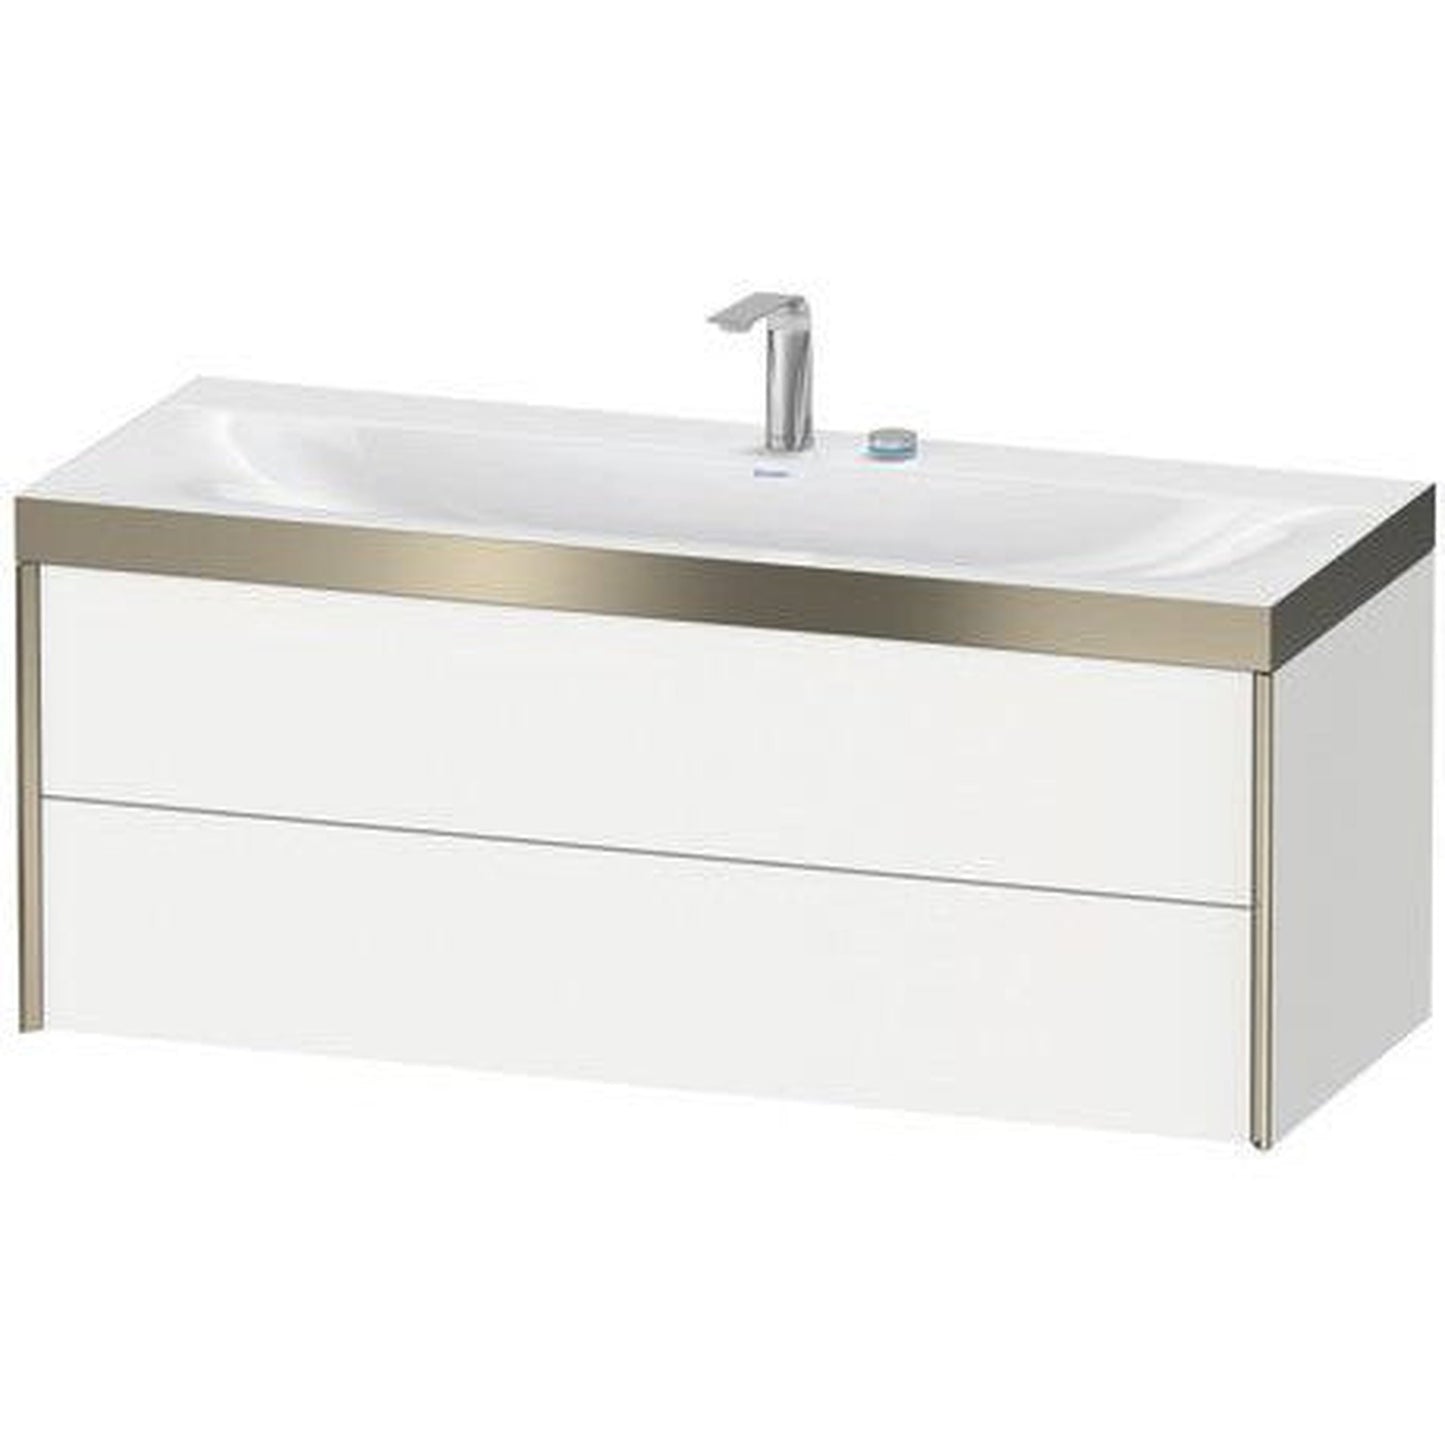 Duravit Xviu 47" x 20" x 19" Two Drawer C-Bonded Wall-Mount Vanity Kit Without Tap Hole, Concrete Gray (XV4617NB207P)